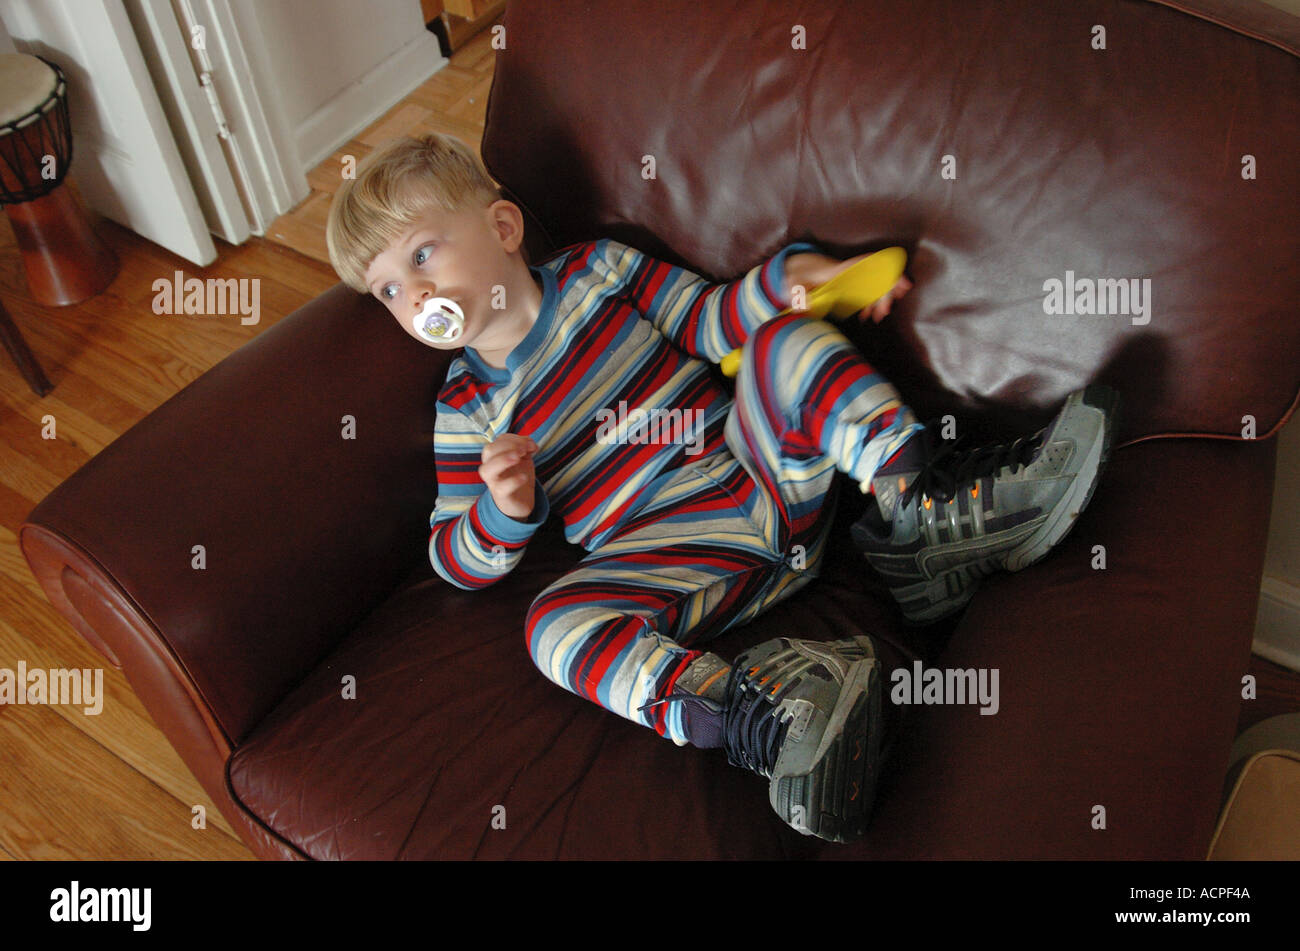 baby humor child laying in chair wearing big sneakers Stock Photo